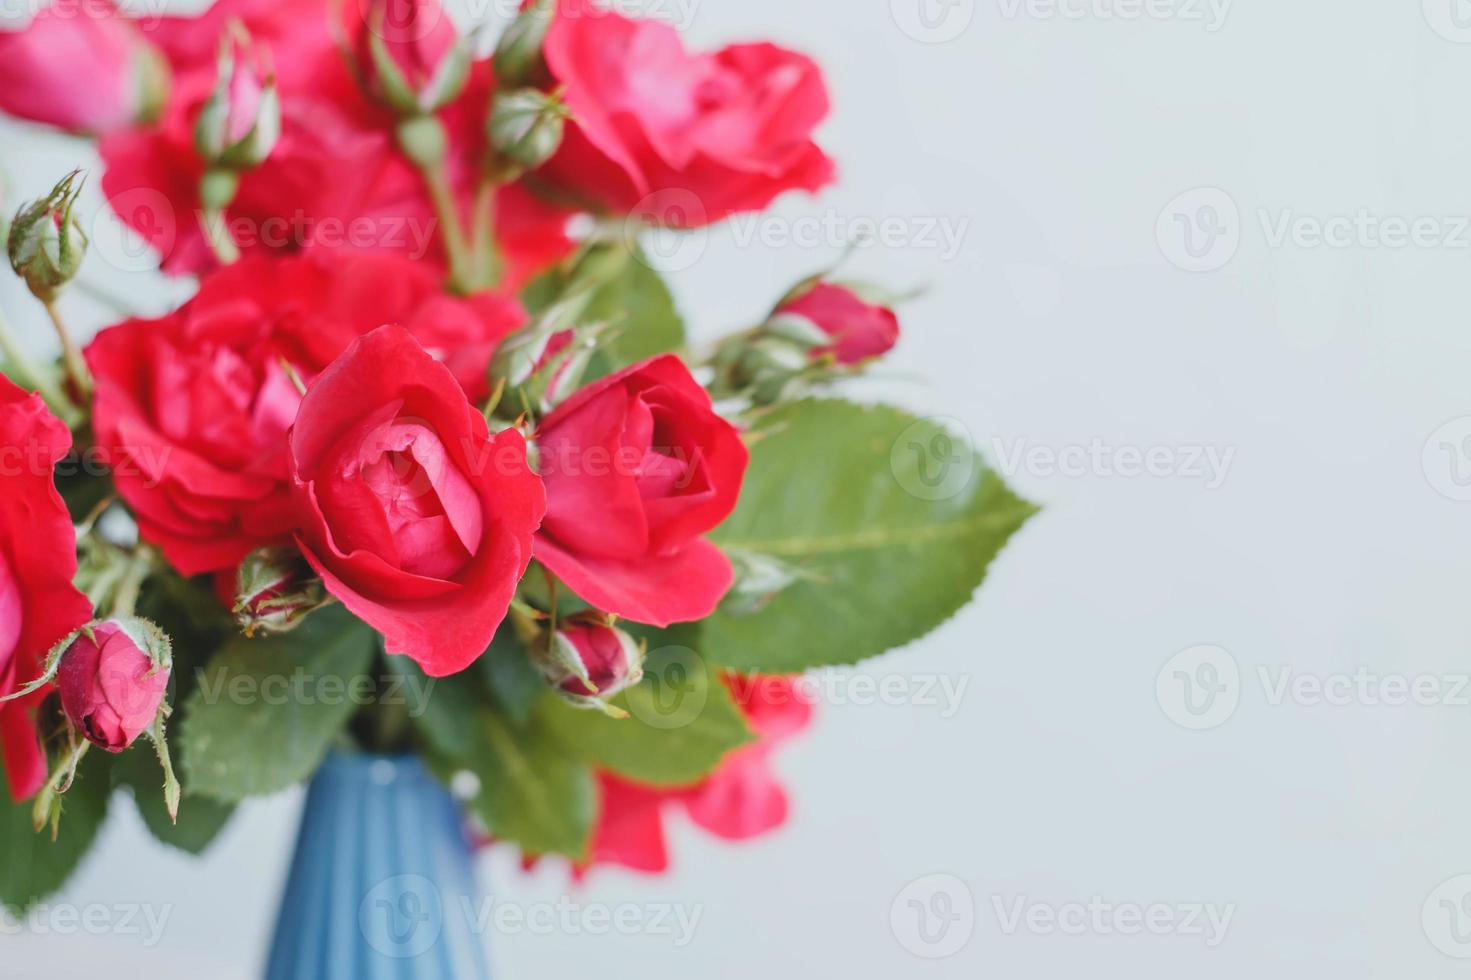 Bouquet of red roses photo